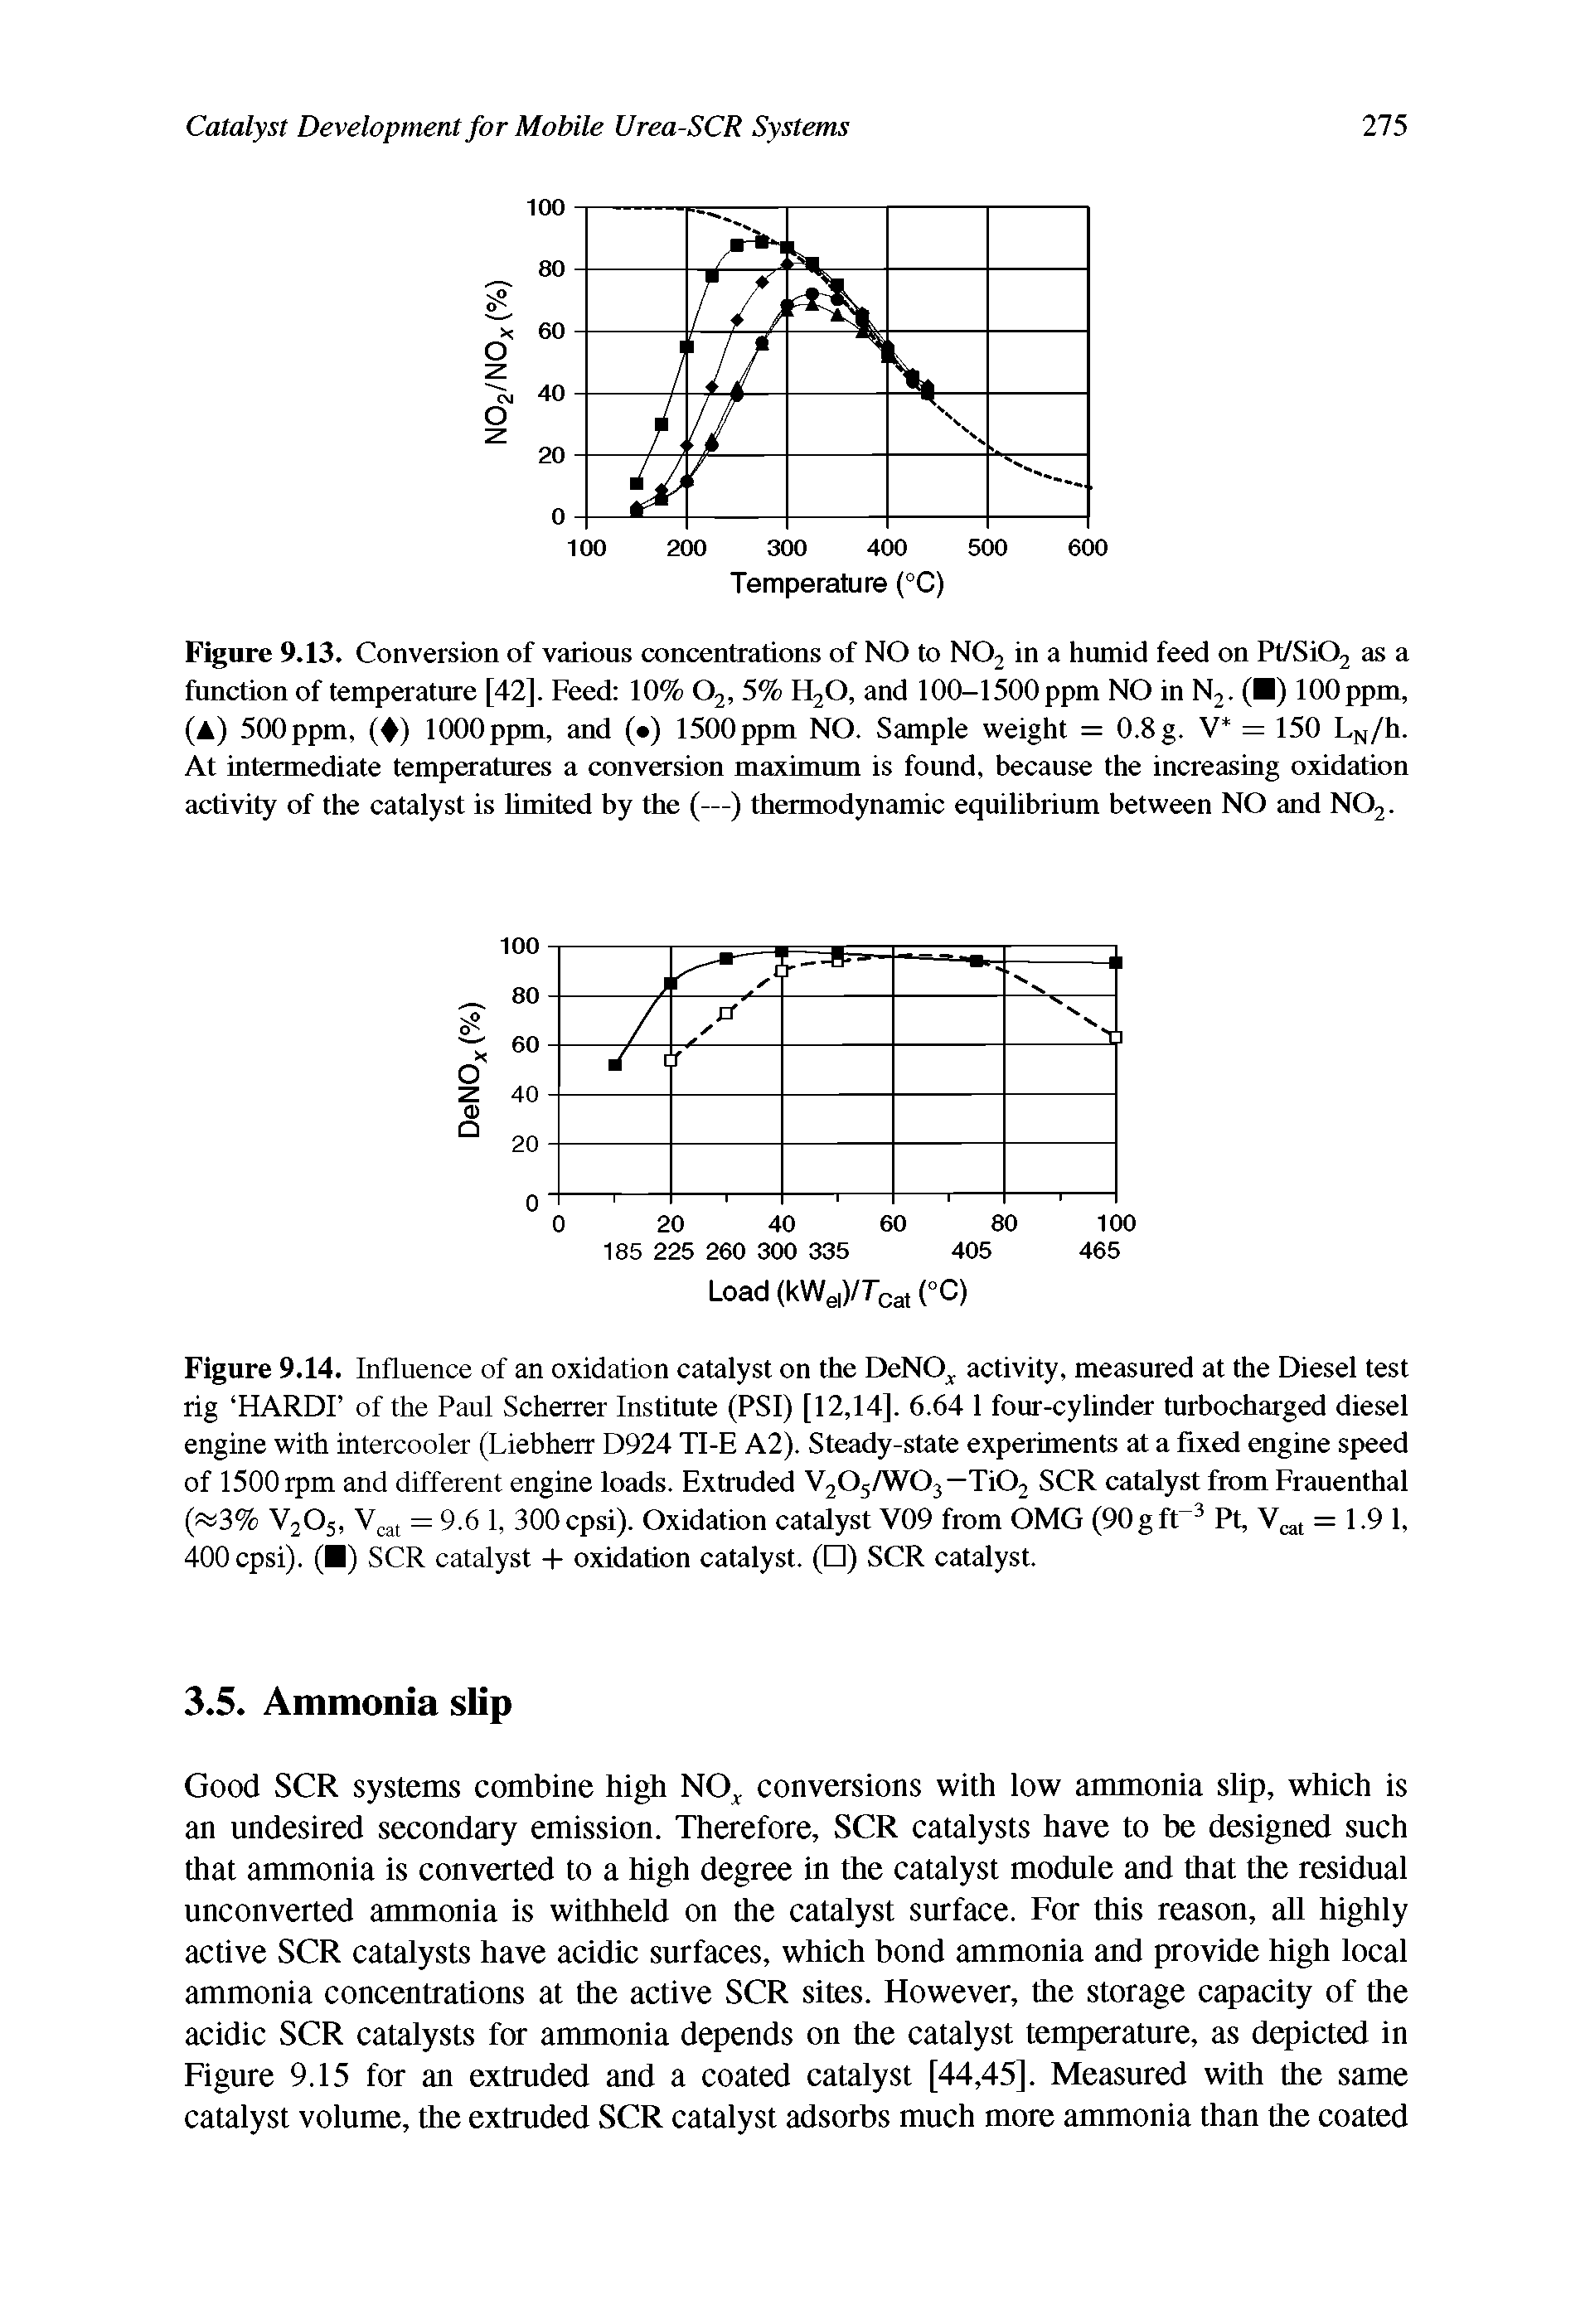 Figure 9.13. Conversion of various concentrations of NO to N02 in a humid feed on Pt/Si02 as a function of temperature [42]. Feed 10% 02, 5% H20, and 100-1500 ppm NO in N2. ( ) 100ppm, (A) 500ppm, ( ) lOOOppm, and ( ) 1500ppm NO. Sample weight = 0.8g. V = 150 LN/h. At intermediate temperatures a conversion maximum is found, because the increasing oxidation activity of the catalyst is limited by the (—) thermodynamic equilibrium between NO and N02.